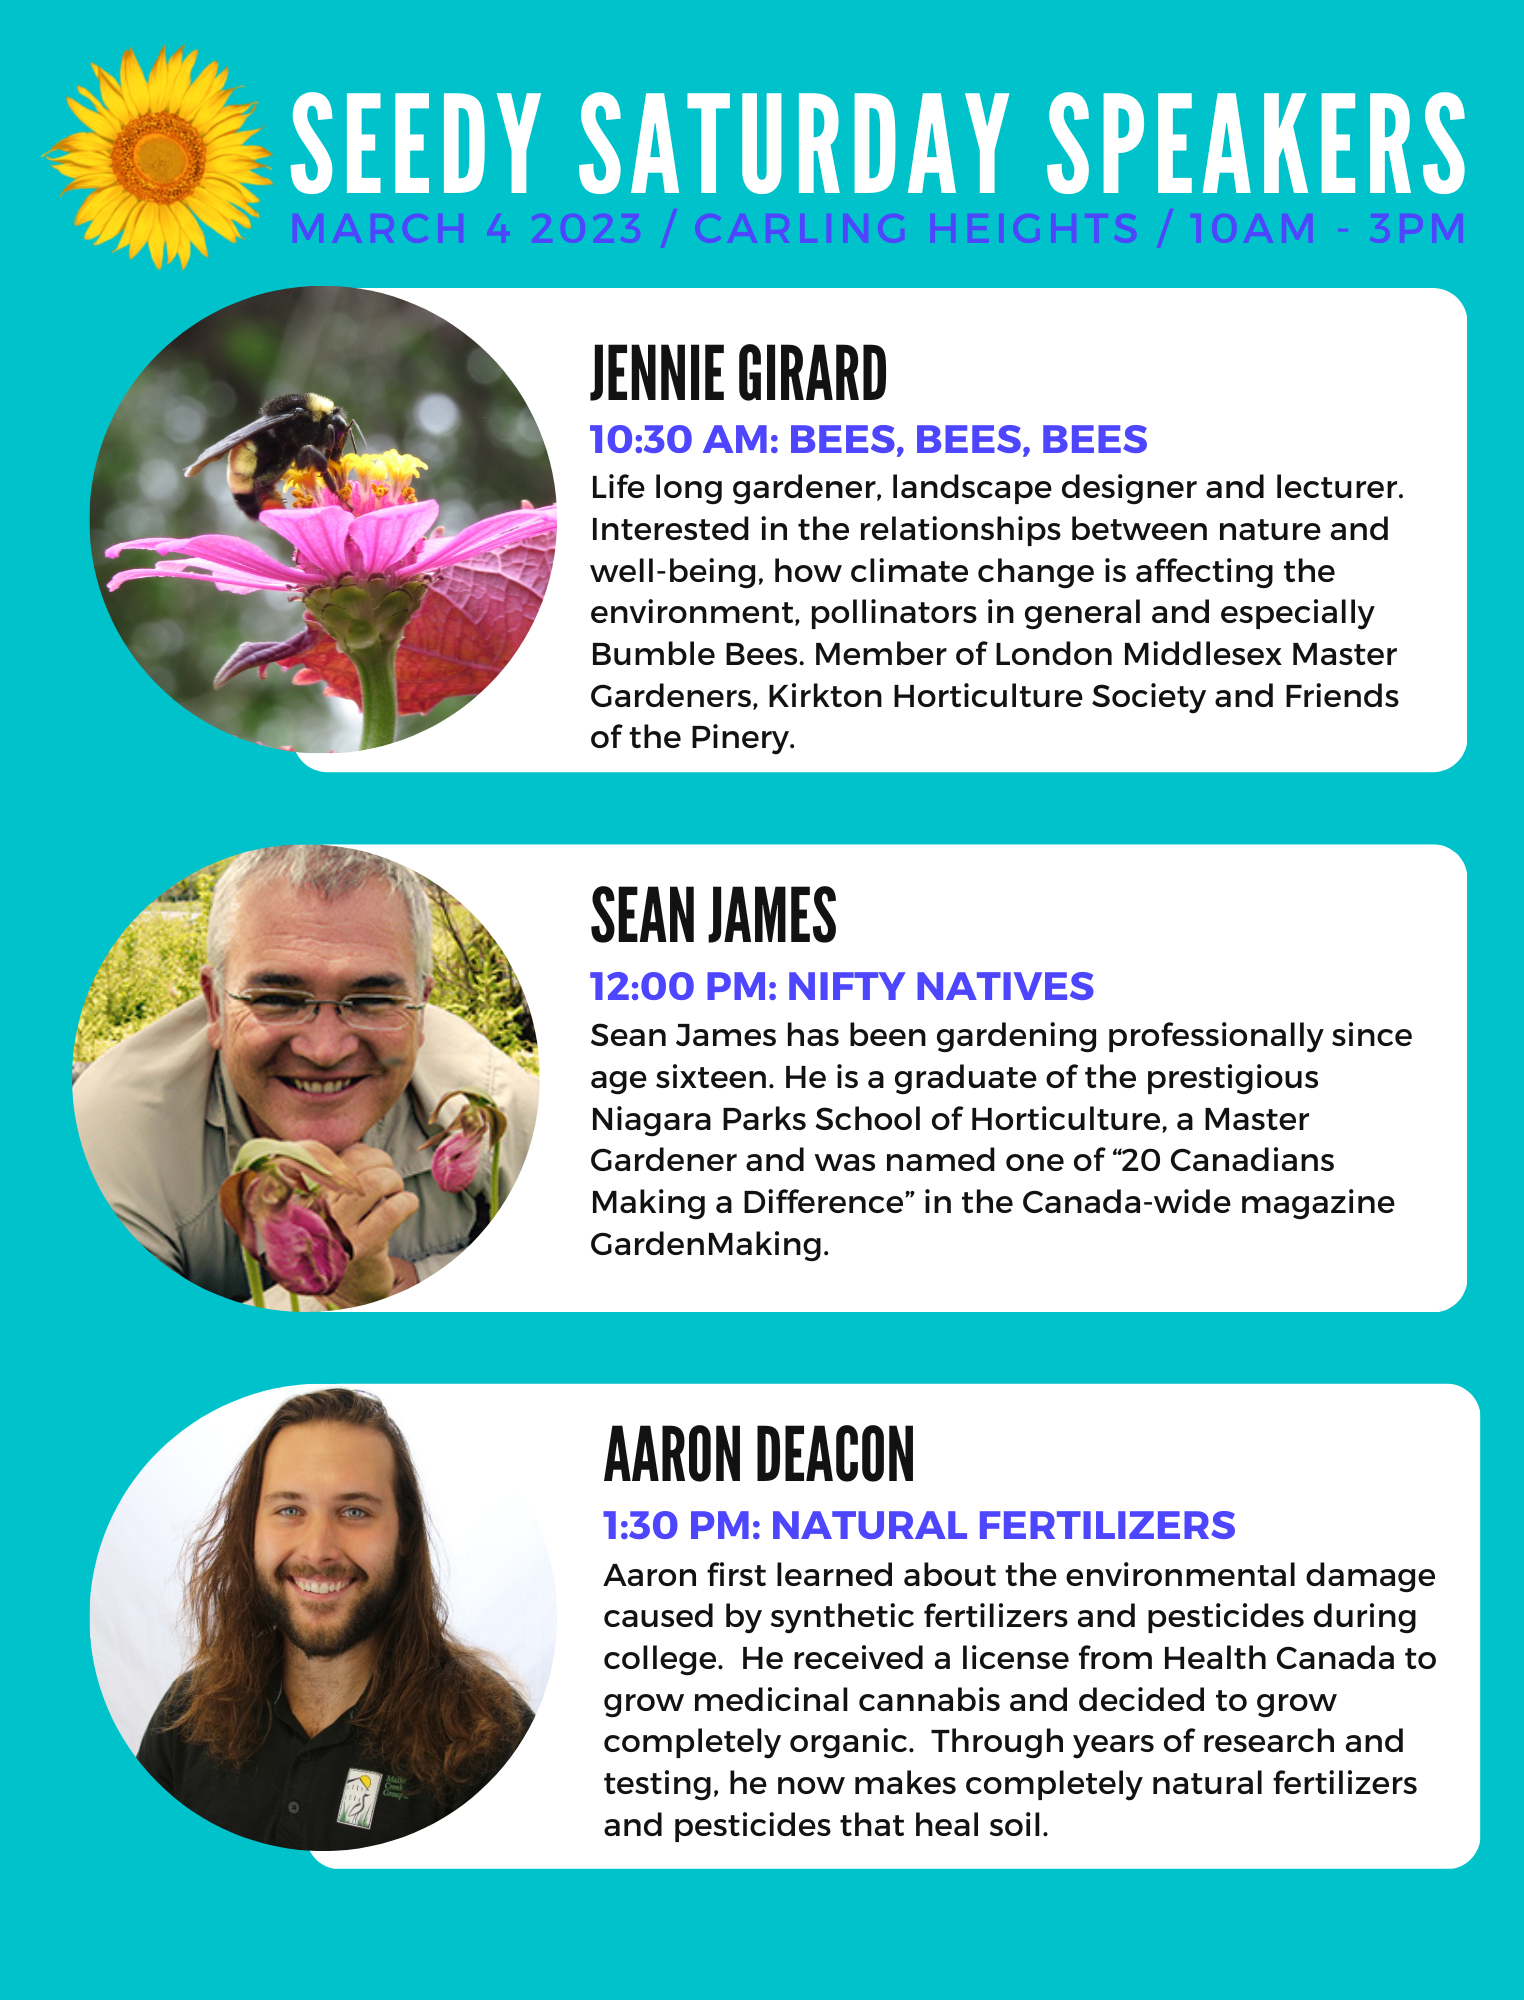 Speakers for Seedy Saturday - Schedule and Bios